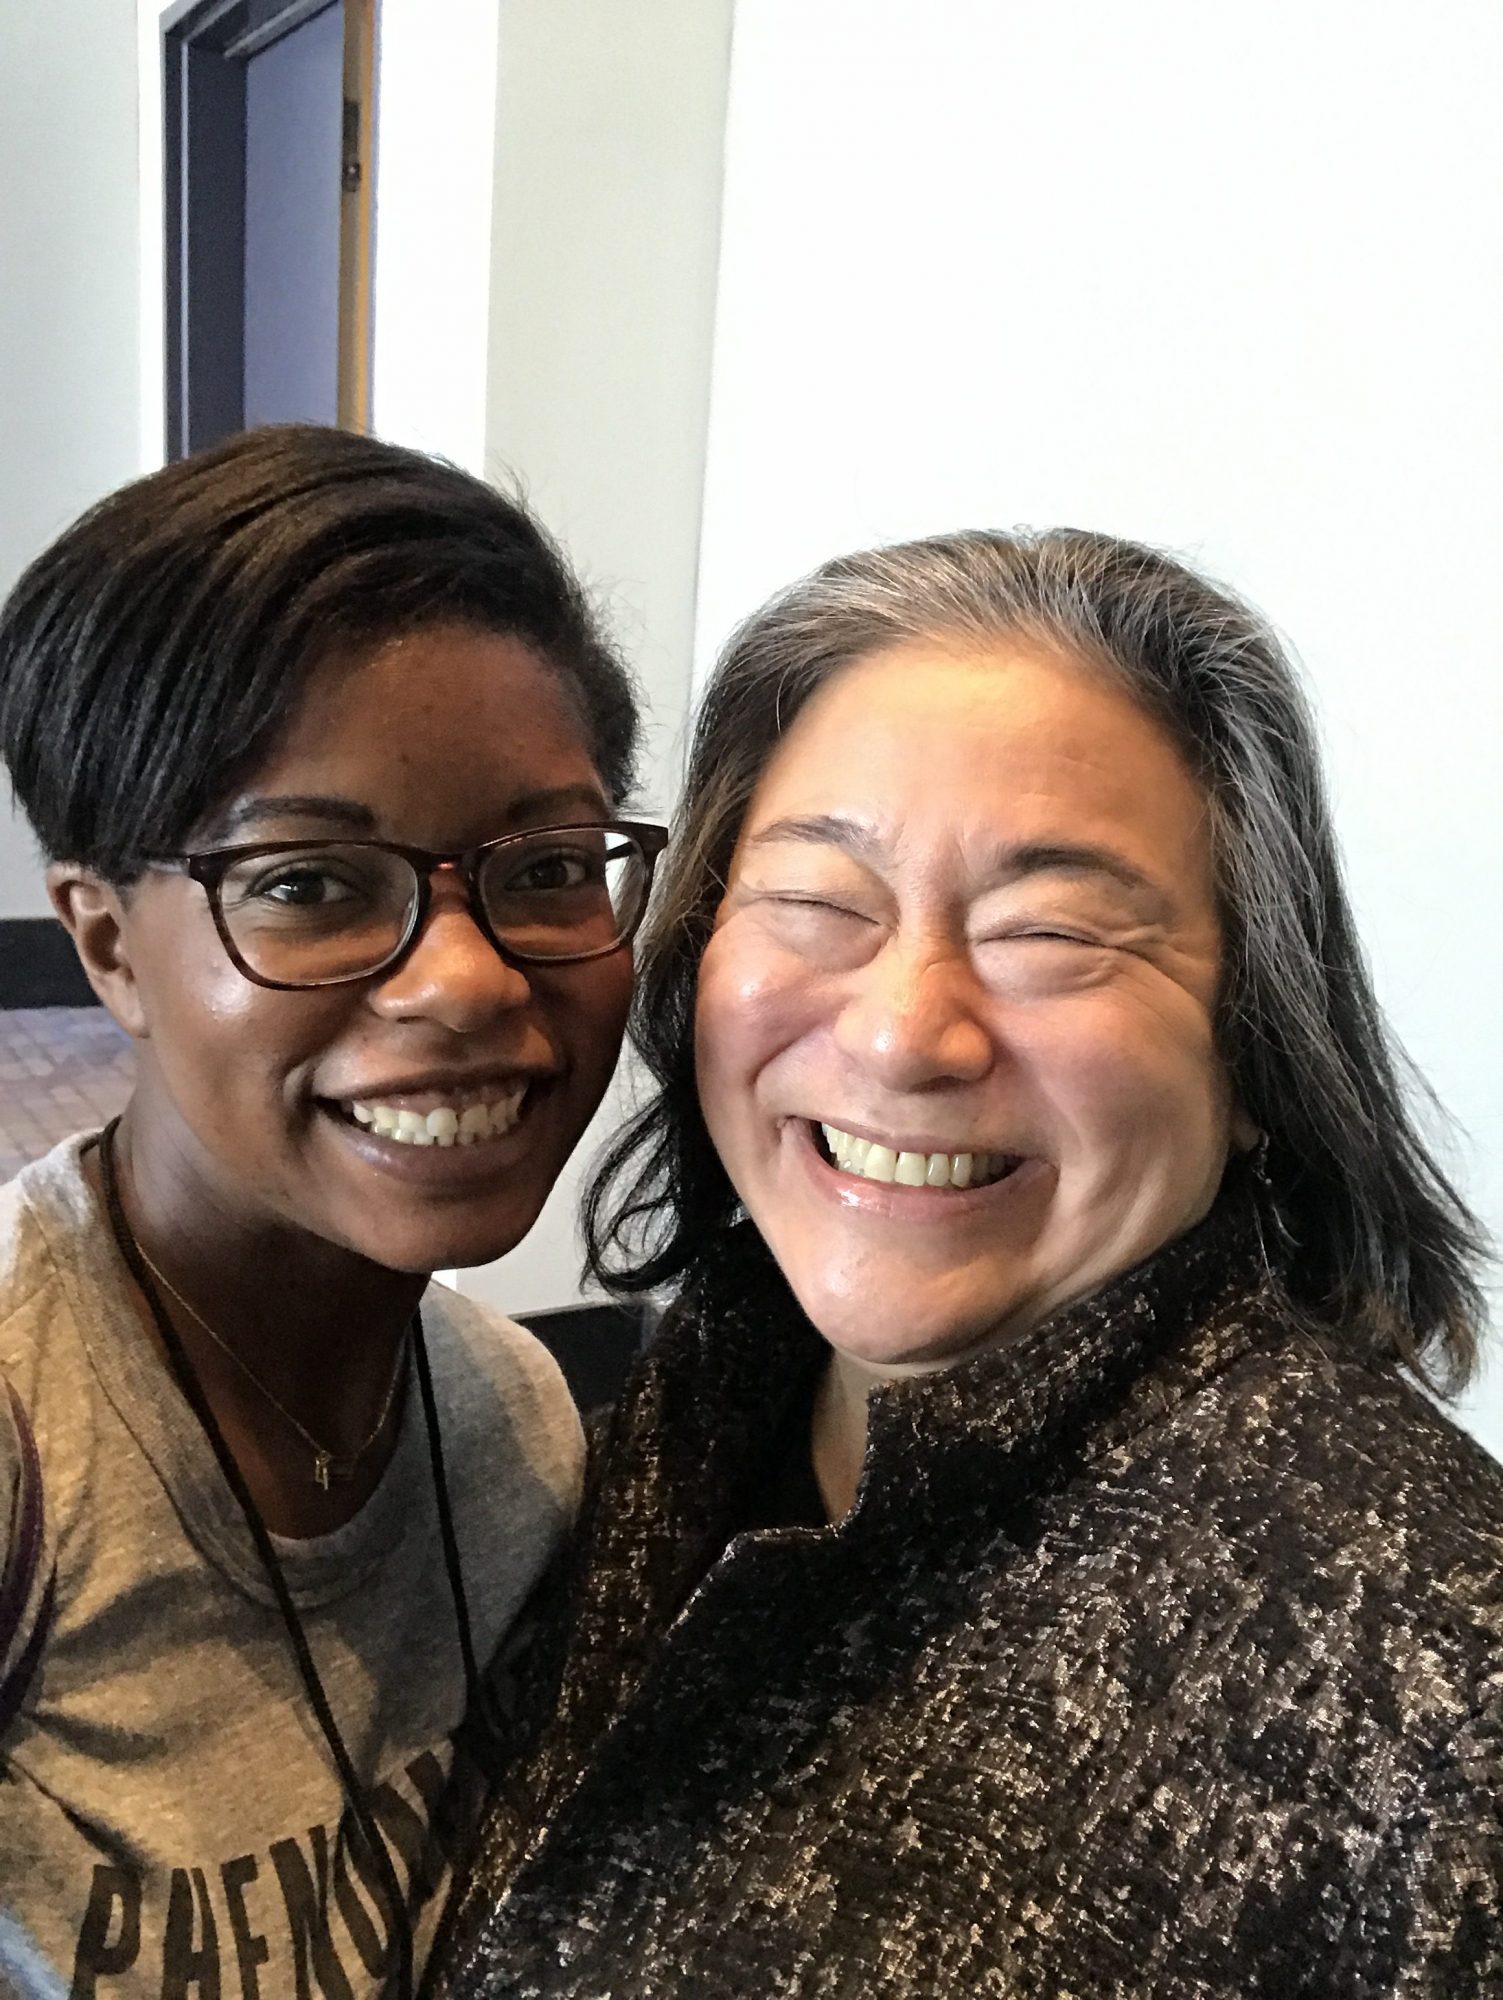 With Tina Tchen, former Executive Director of the White House Council on Women and Girls